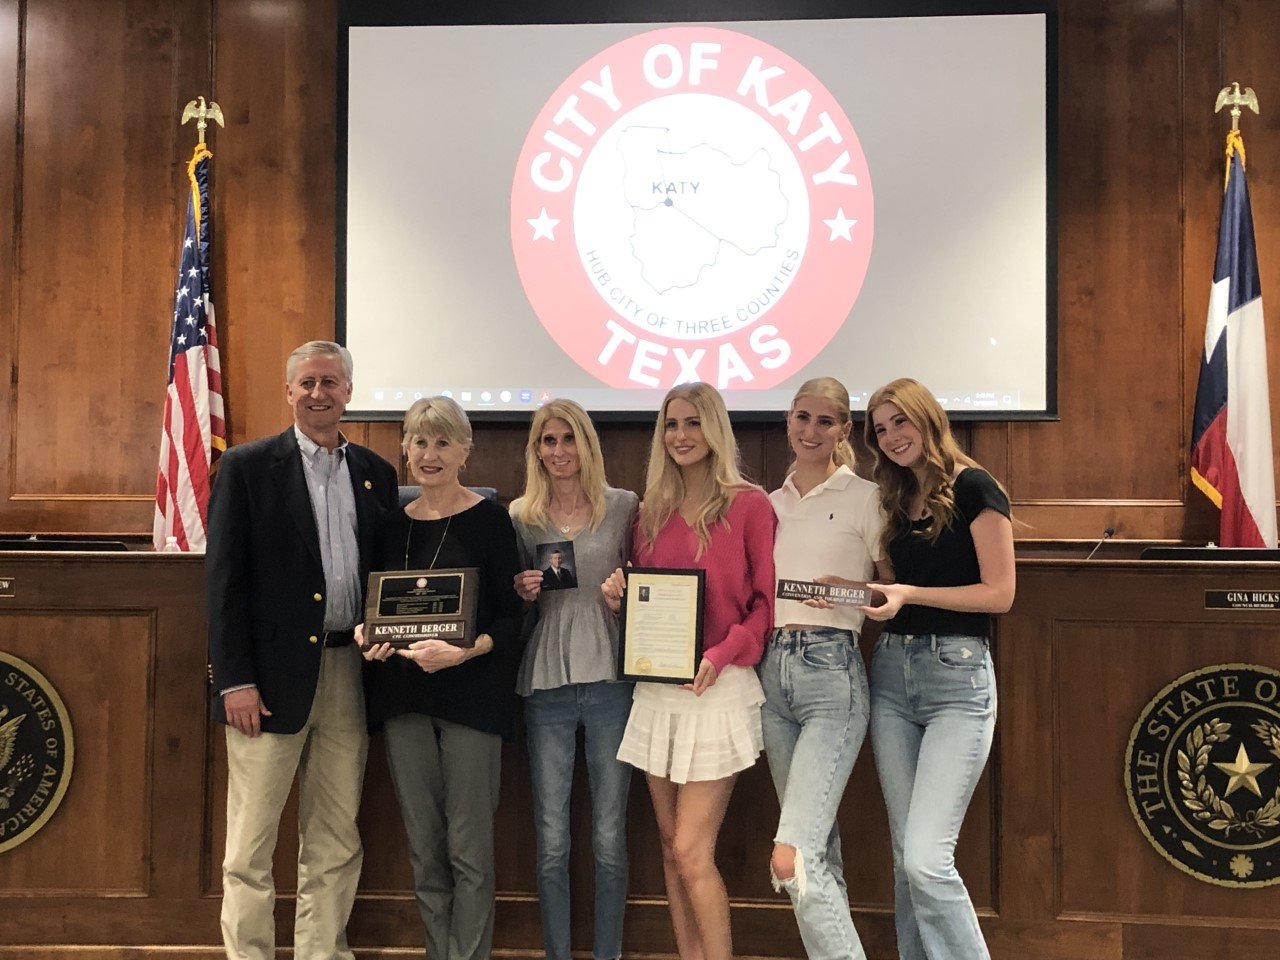 Mayor Dusty Thiele joined the Berger family Monday at City Hall to honor Kenneth Berger, who died Sept. 18. Berger served in a variety of municipal positions, including on the Katy City Council. Accepting the proclamation is his widow Debbie Berger, who is joined by daughter Shelly Royster, and granddaughters Katelyn, Hillary and Allyson Royster.